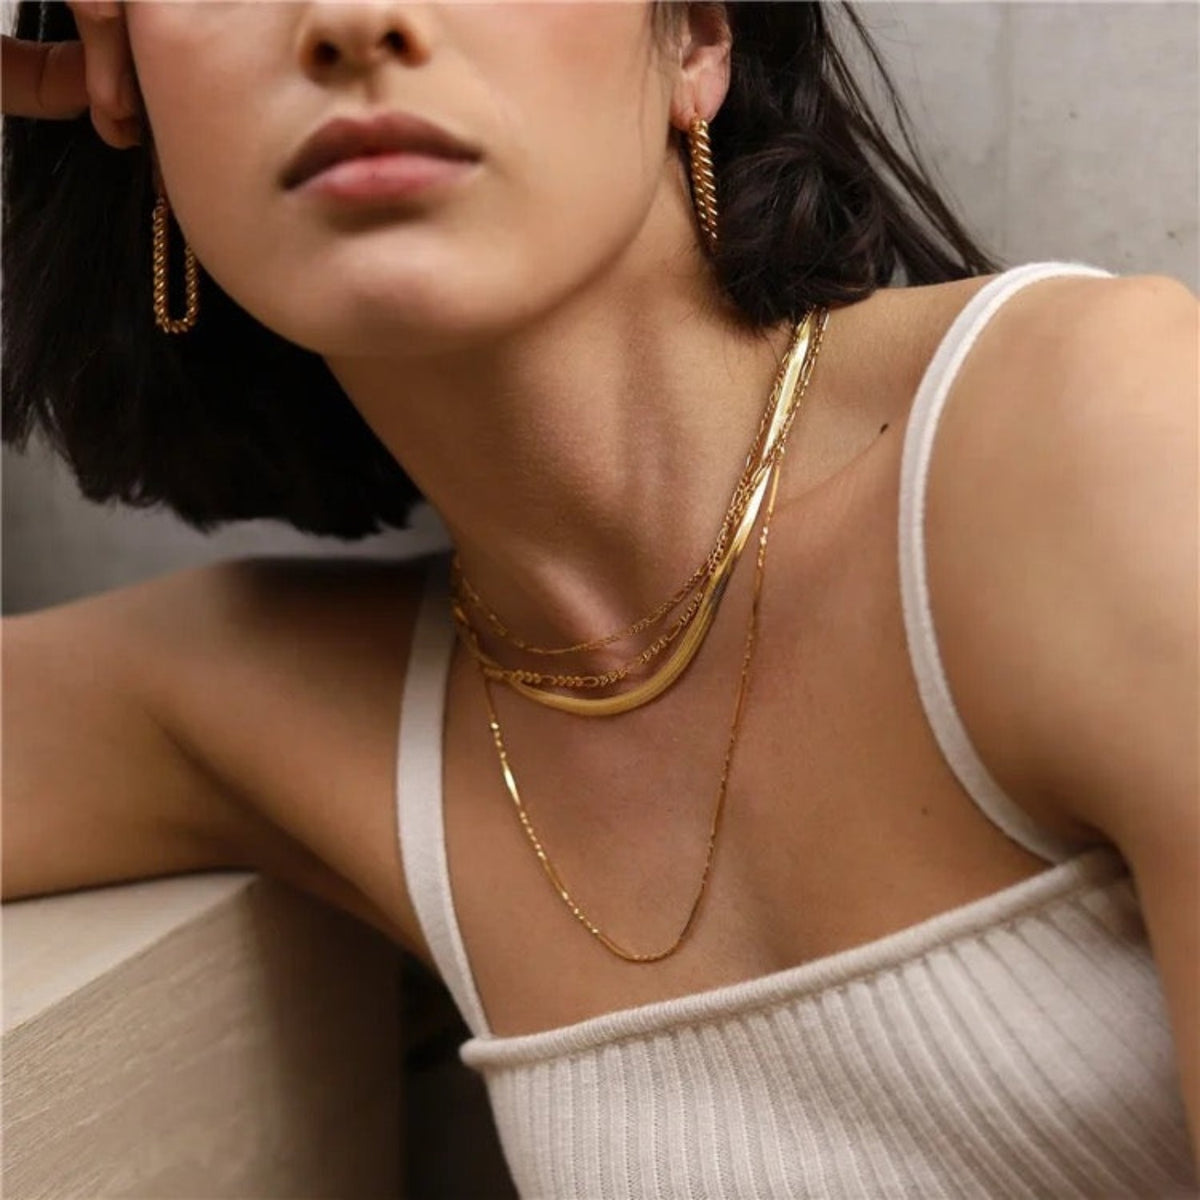 18k gold plated necklace may-i reliquia frankly my dear 